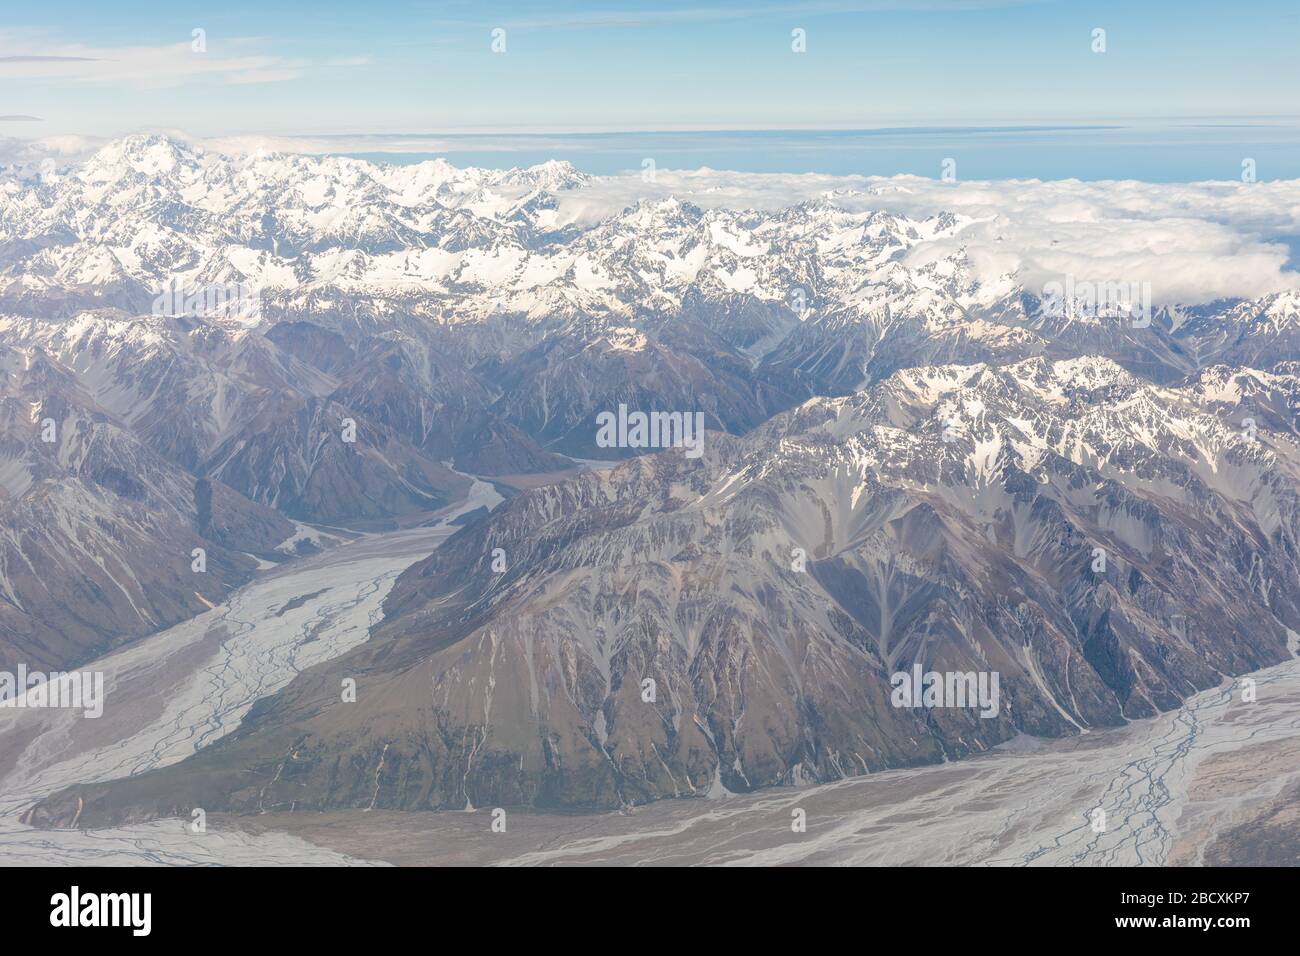 Aerial view of the Southern Alps of New Zealand Stock Photo